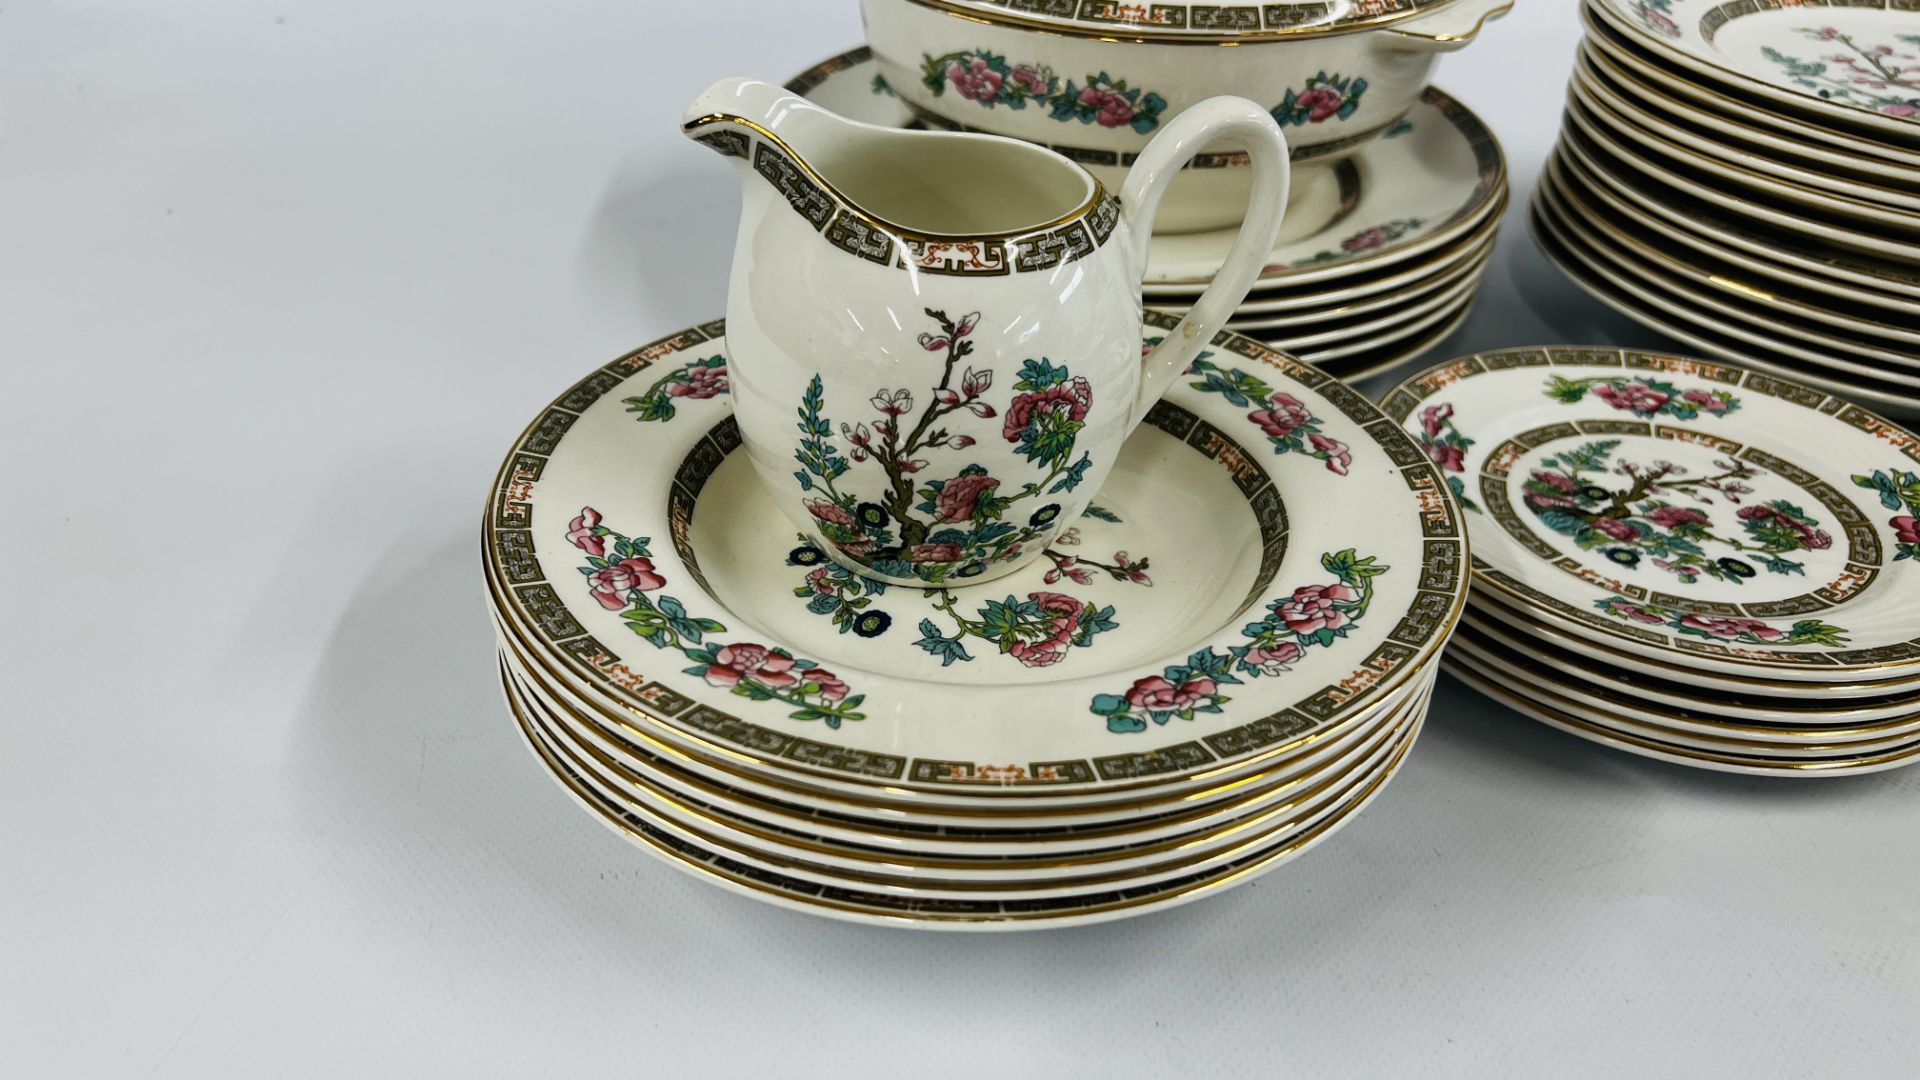 55 PIECES OF WEDGEWOOD INDIAN TREE DINNERWARE INCLUDING PLATES, CUPS, SAUCERS, TUREENS ETC. - Image 9 of 10